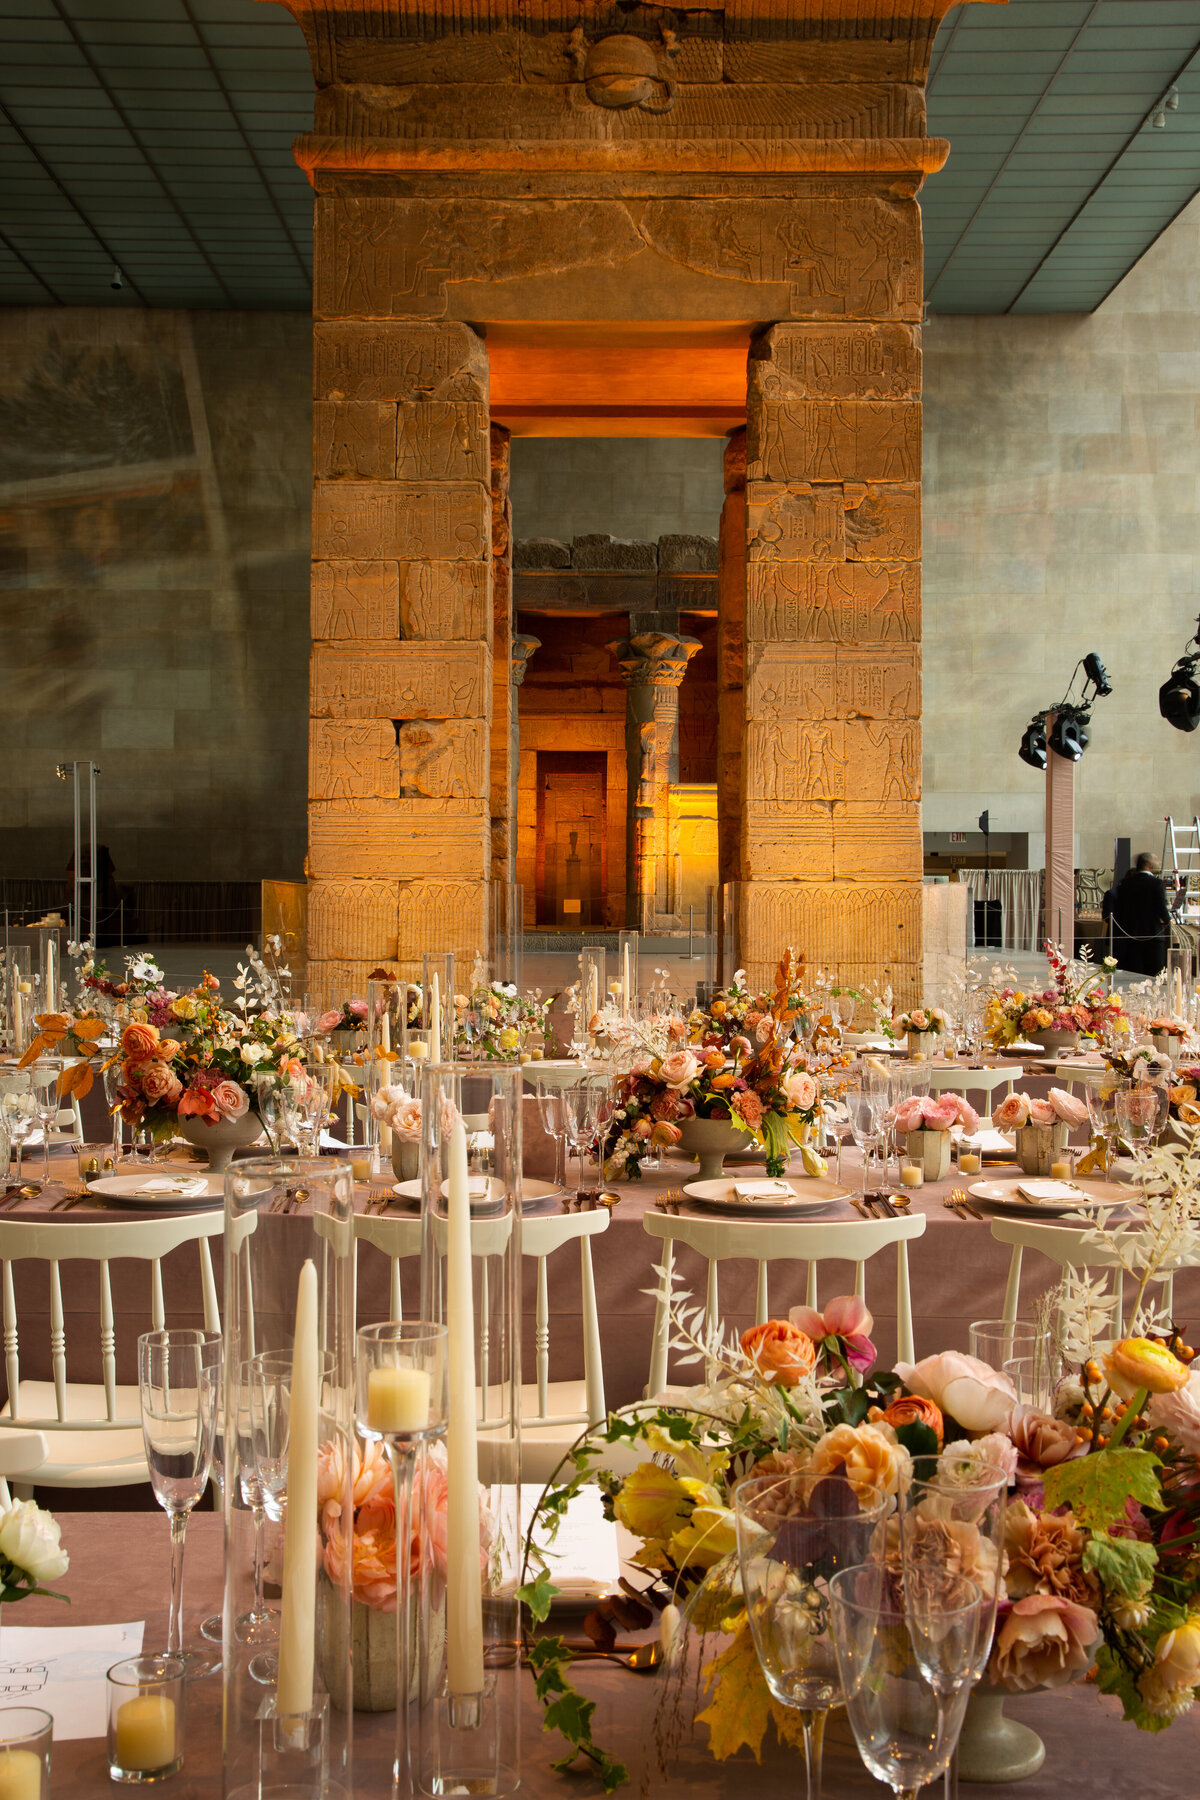 Wedding reception dinner tables at fall wedding at the metropolitan museum of art